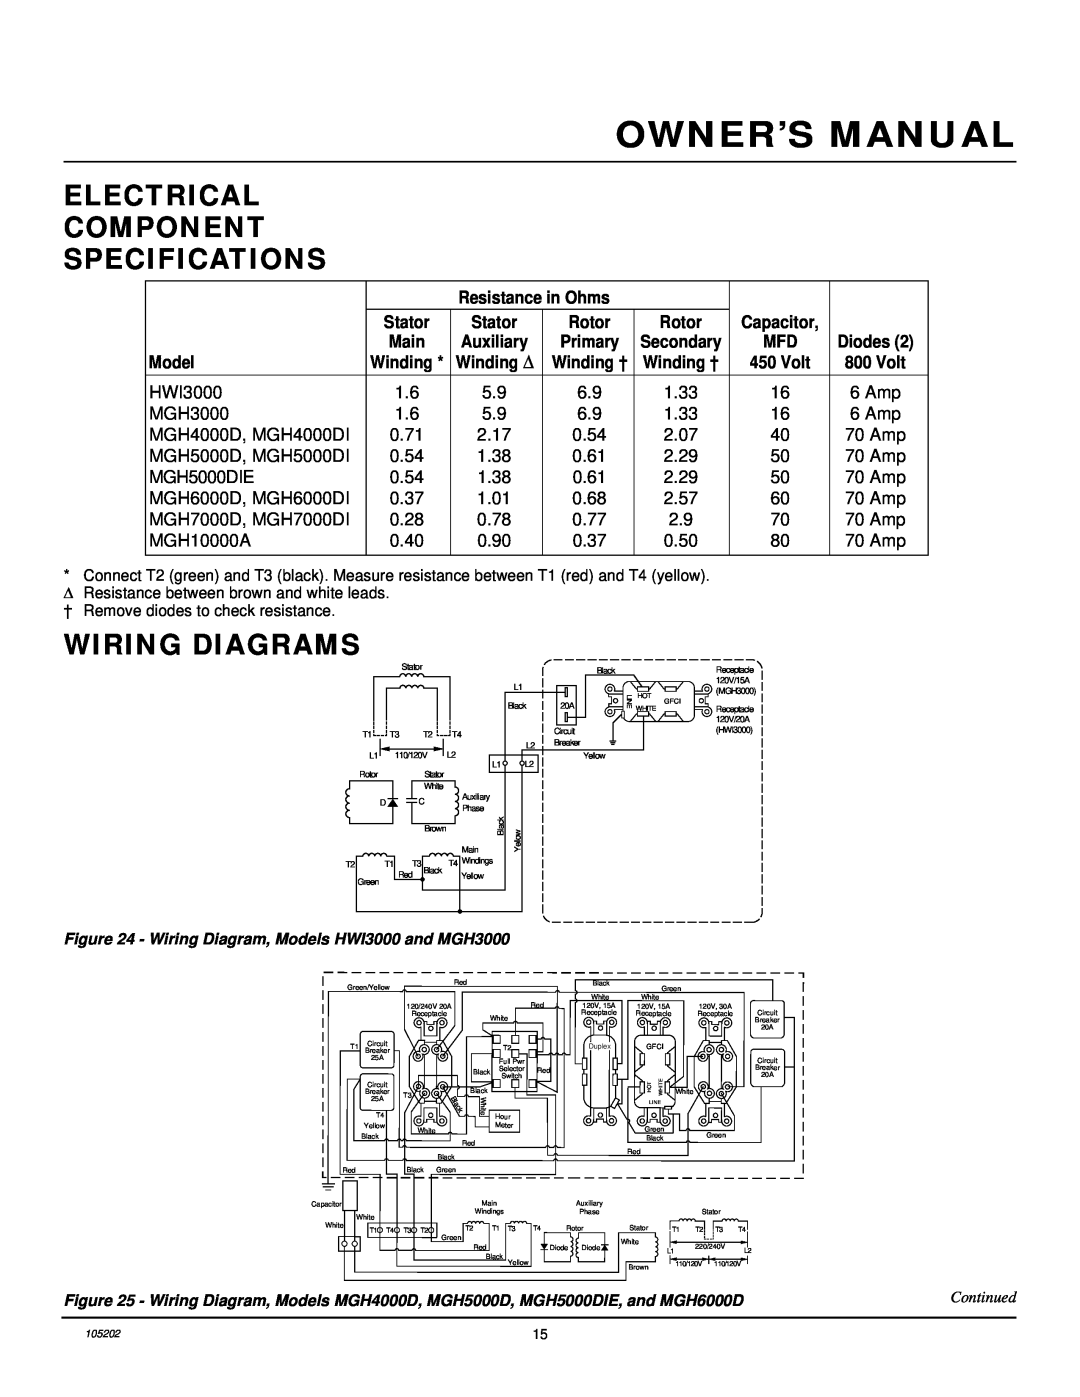 Master Lock Electrical Component Specifications, Wiring Diagrams, Resistance in Ohms, Stator, Rotor, Auxiliary, Model 